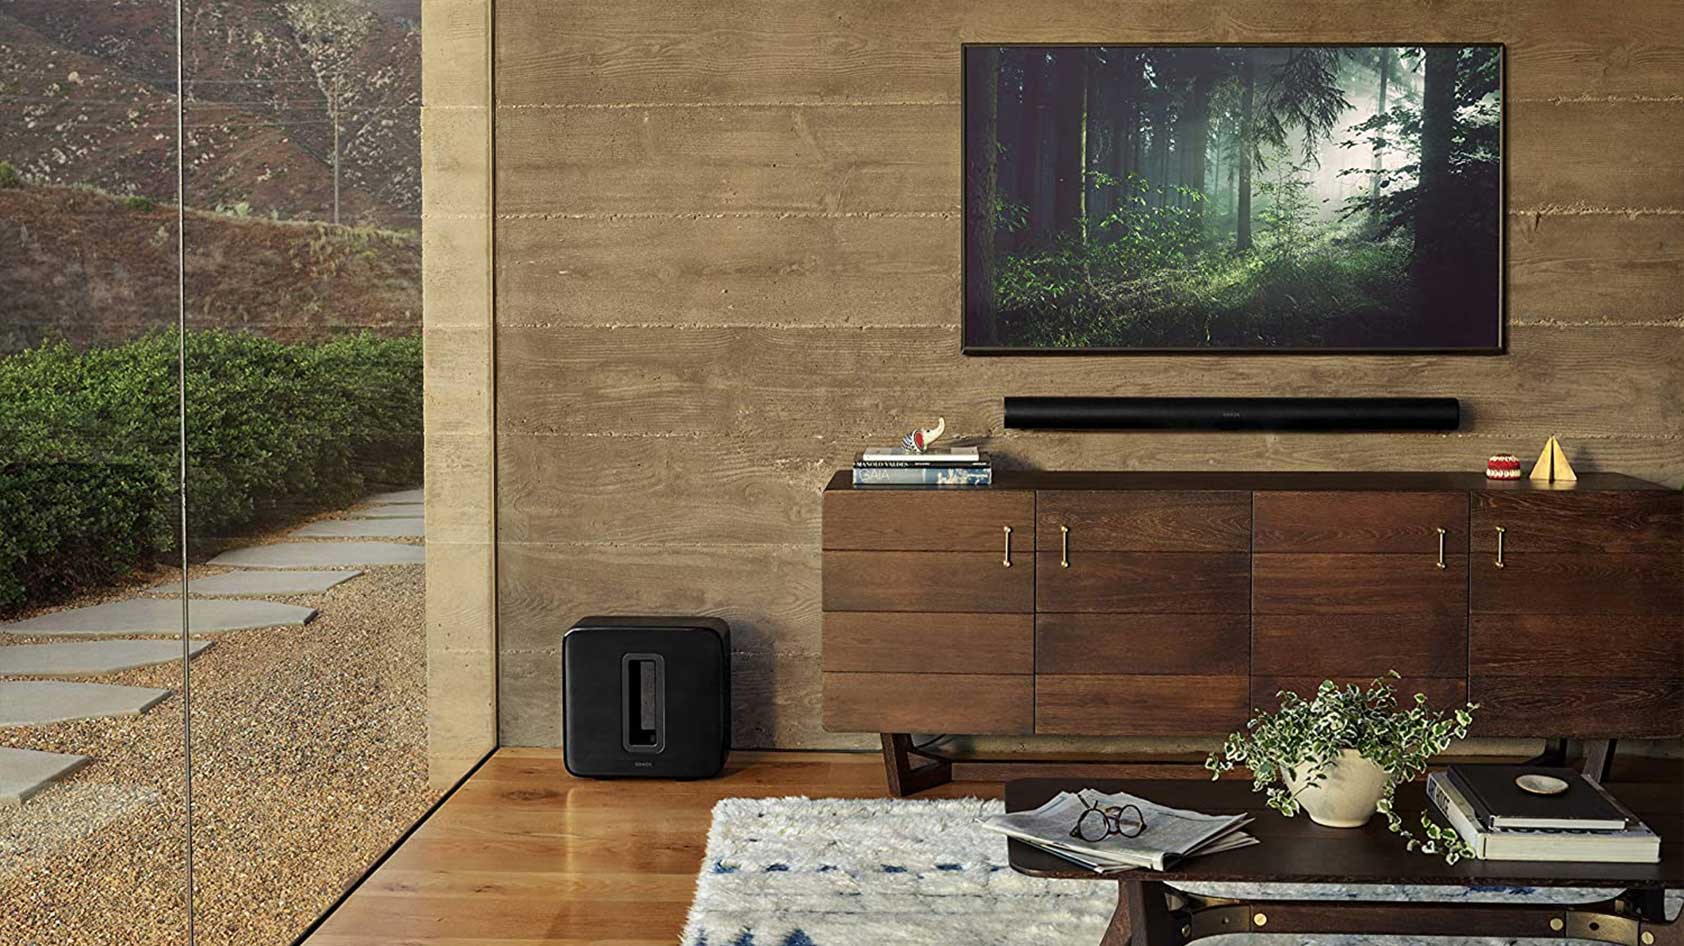 The Sonos Arc and Sonos Sub in black in a living room.